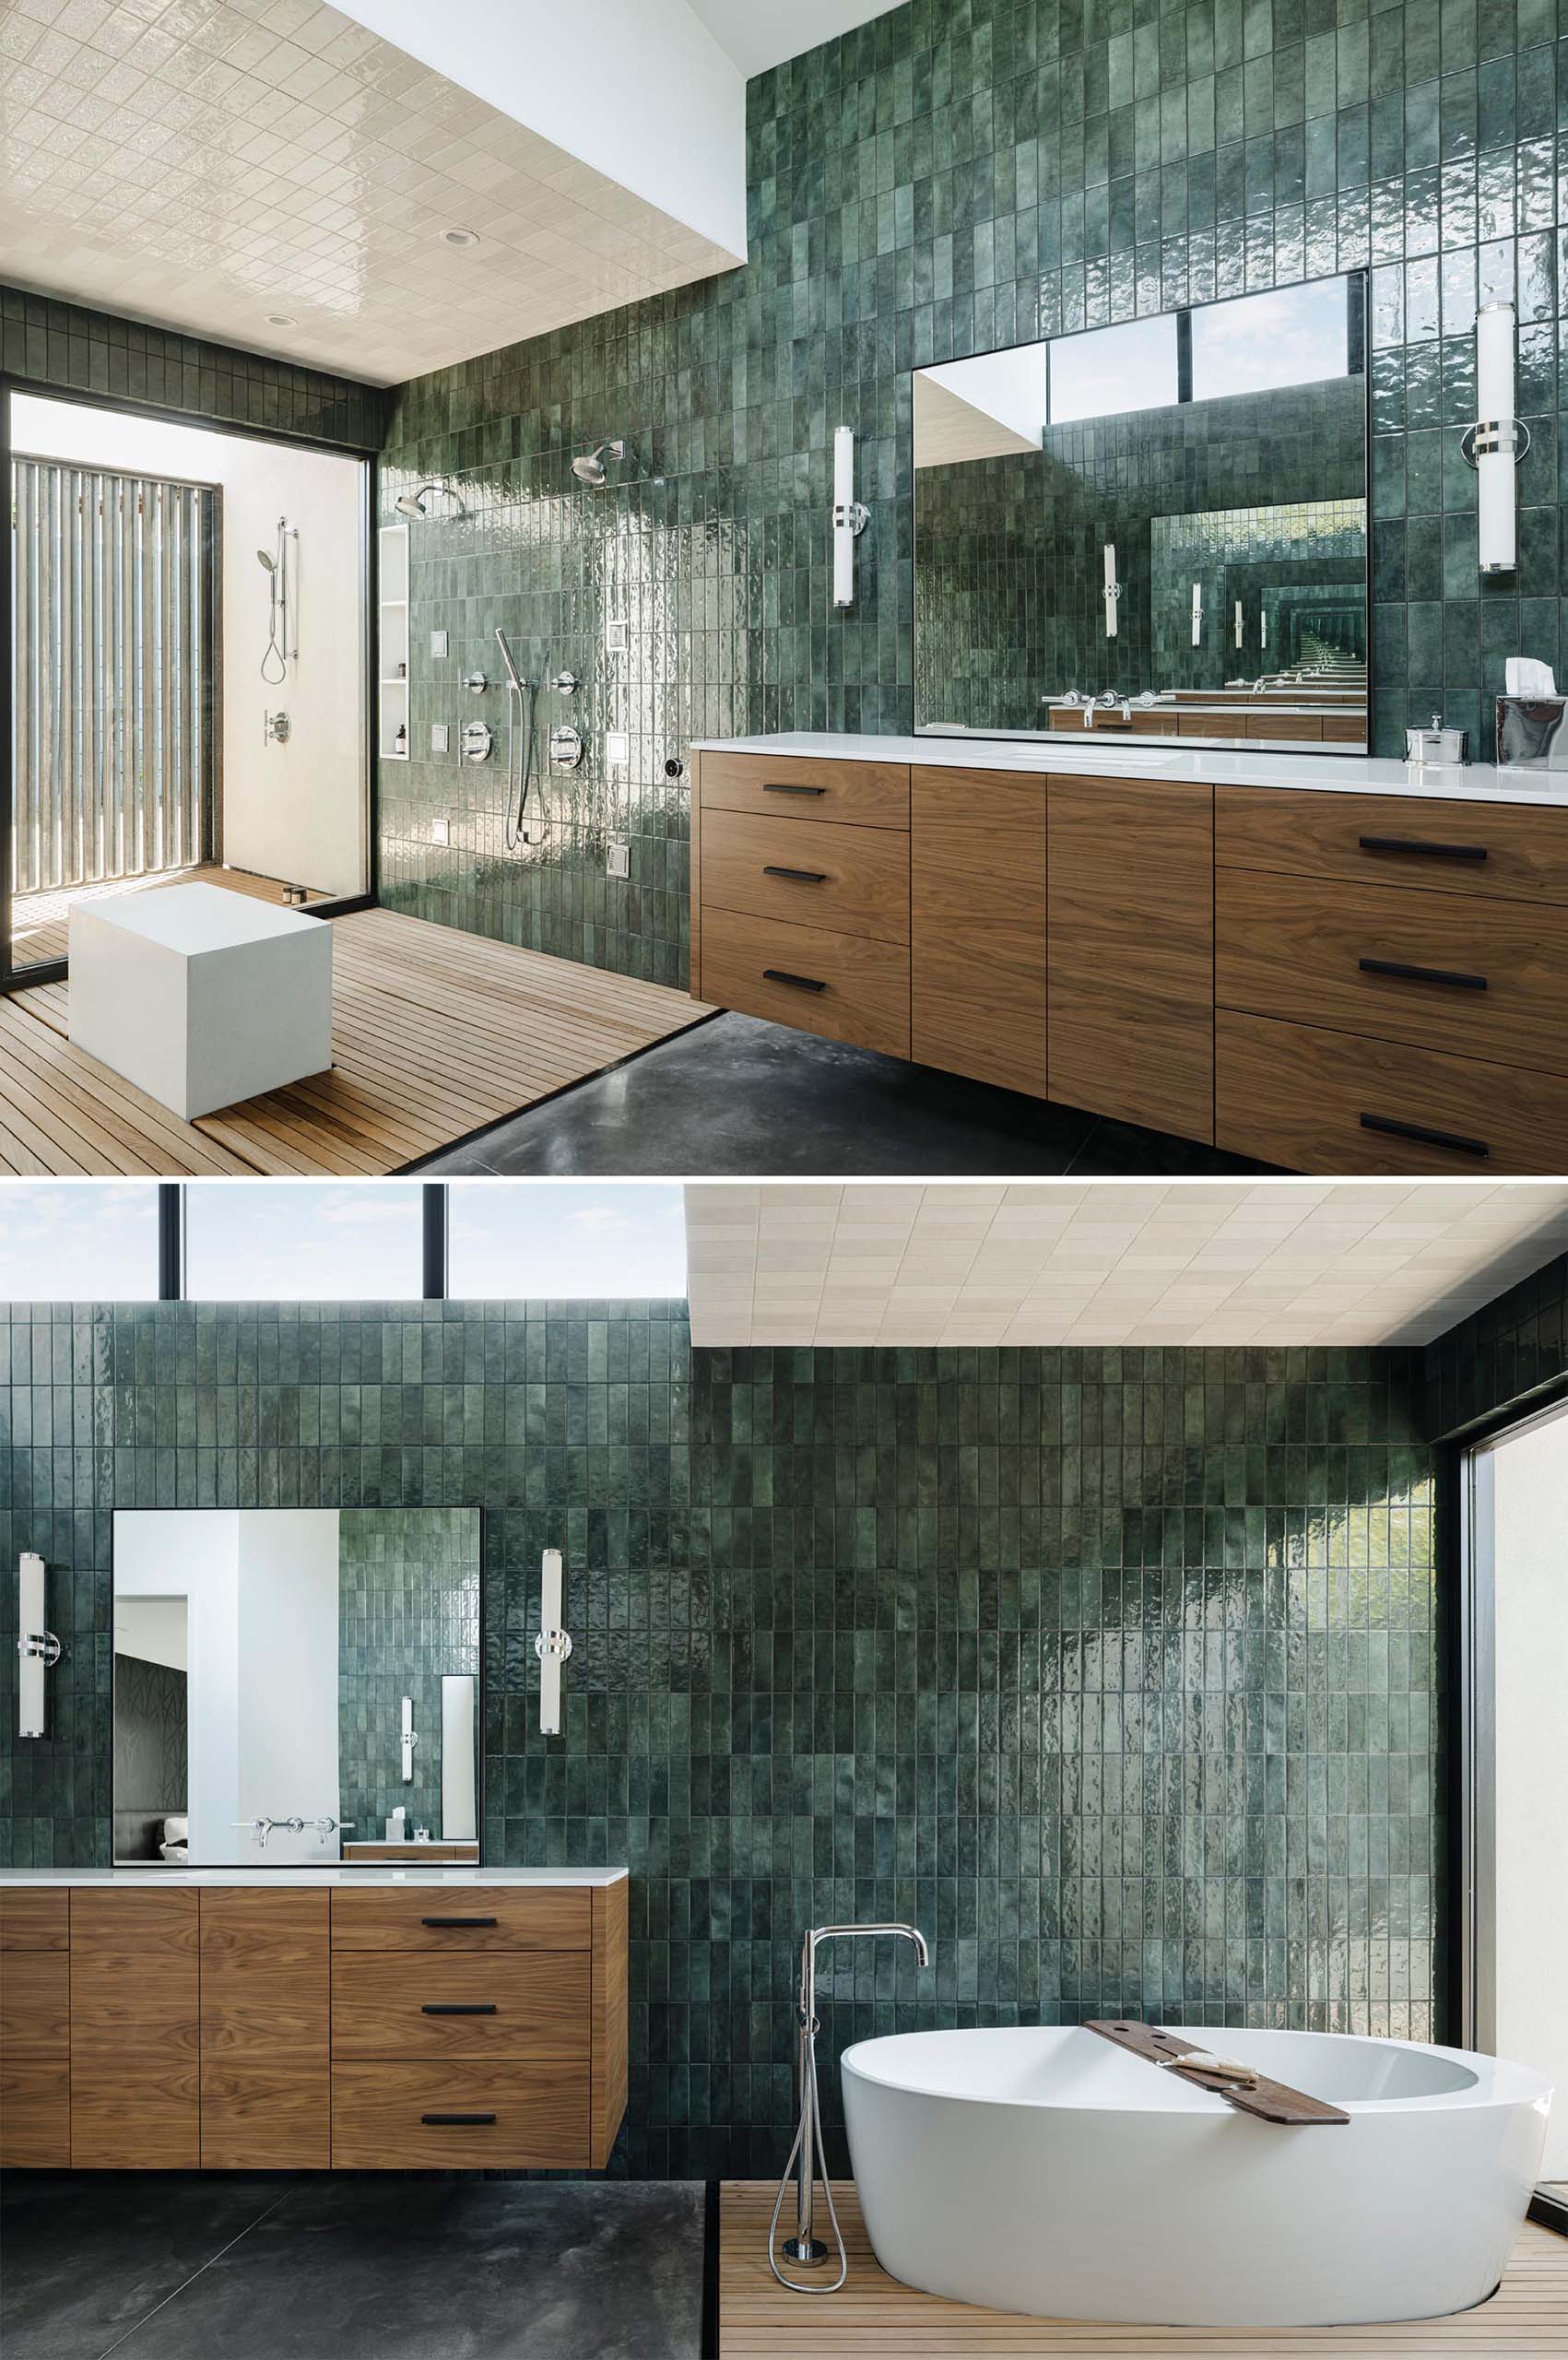 A modern bathroom with a naturally lit shower and bathing area that opens out to an outdoor shower, screened from the nearby neighbor with a custom steel slatted wall. Glazed green wall tiles have been used to create a unique look for the bathroom.